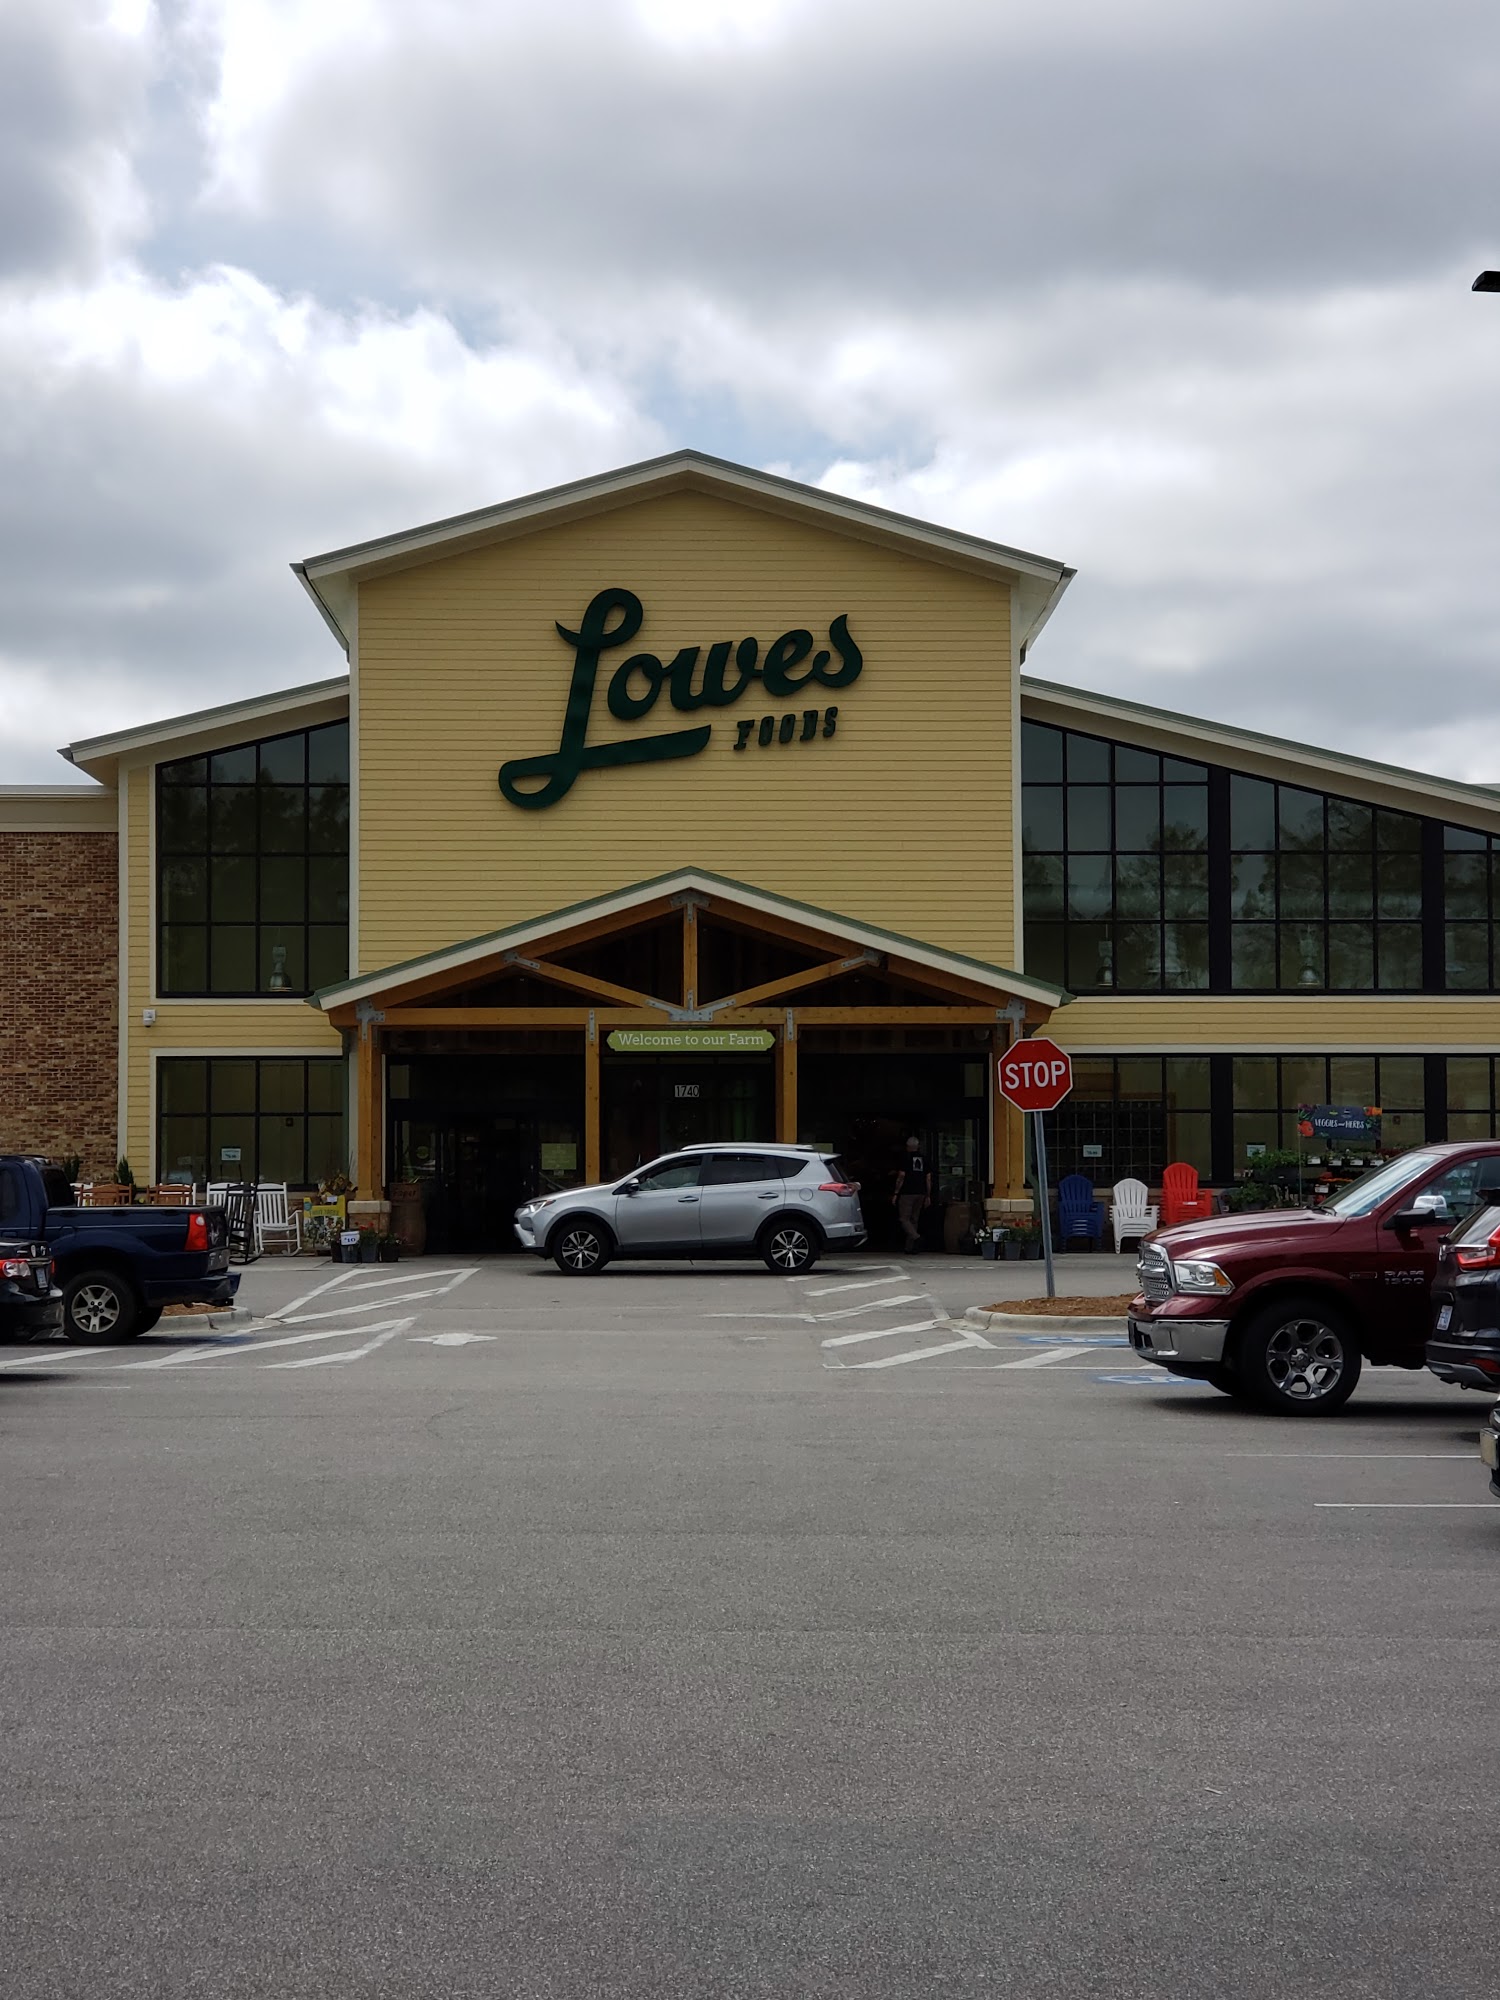 Lowes Foods of Southern Pines